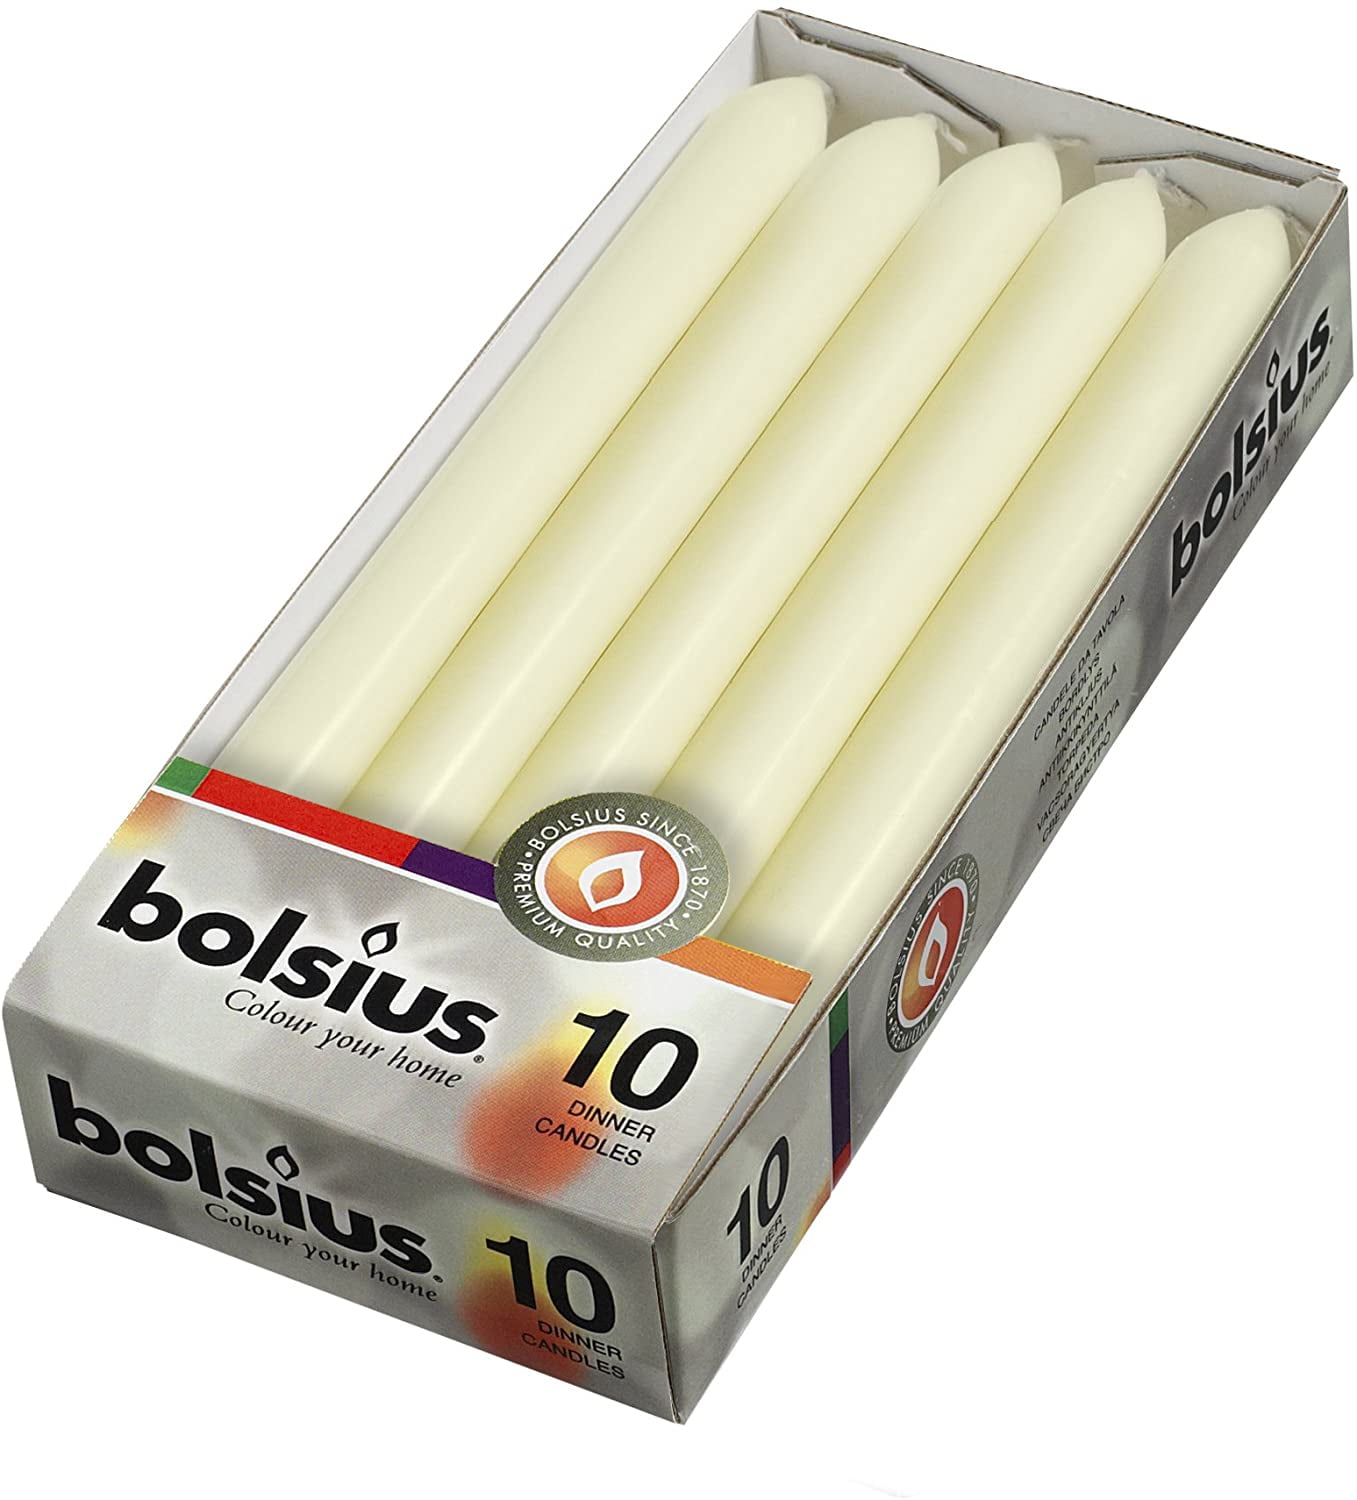 Bolsius Dripless and Dinner Candles, 10-inch Ivory (10 Pack), Burn time: 7.5 hours By Visit the BOLSIUS Store - Walmart.com